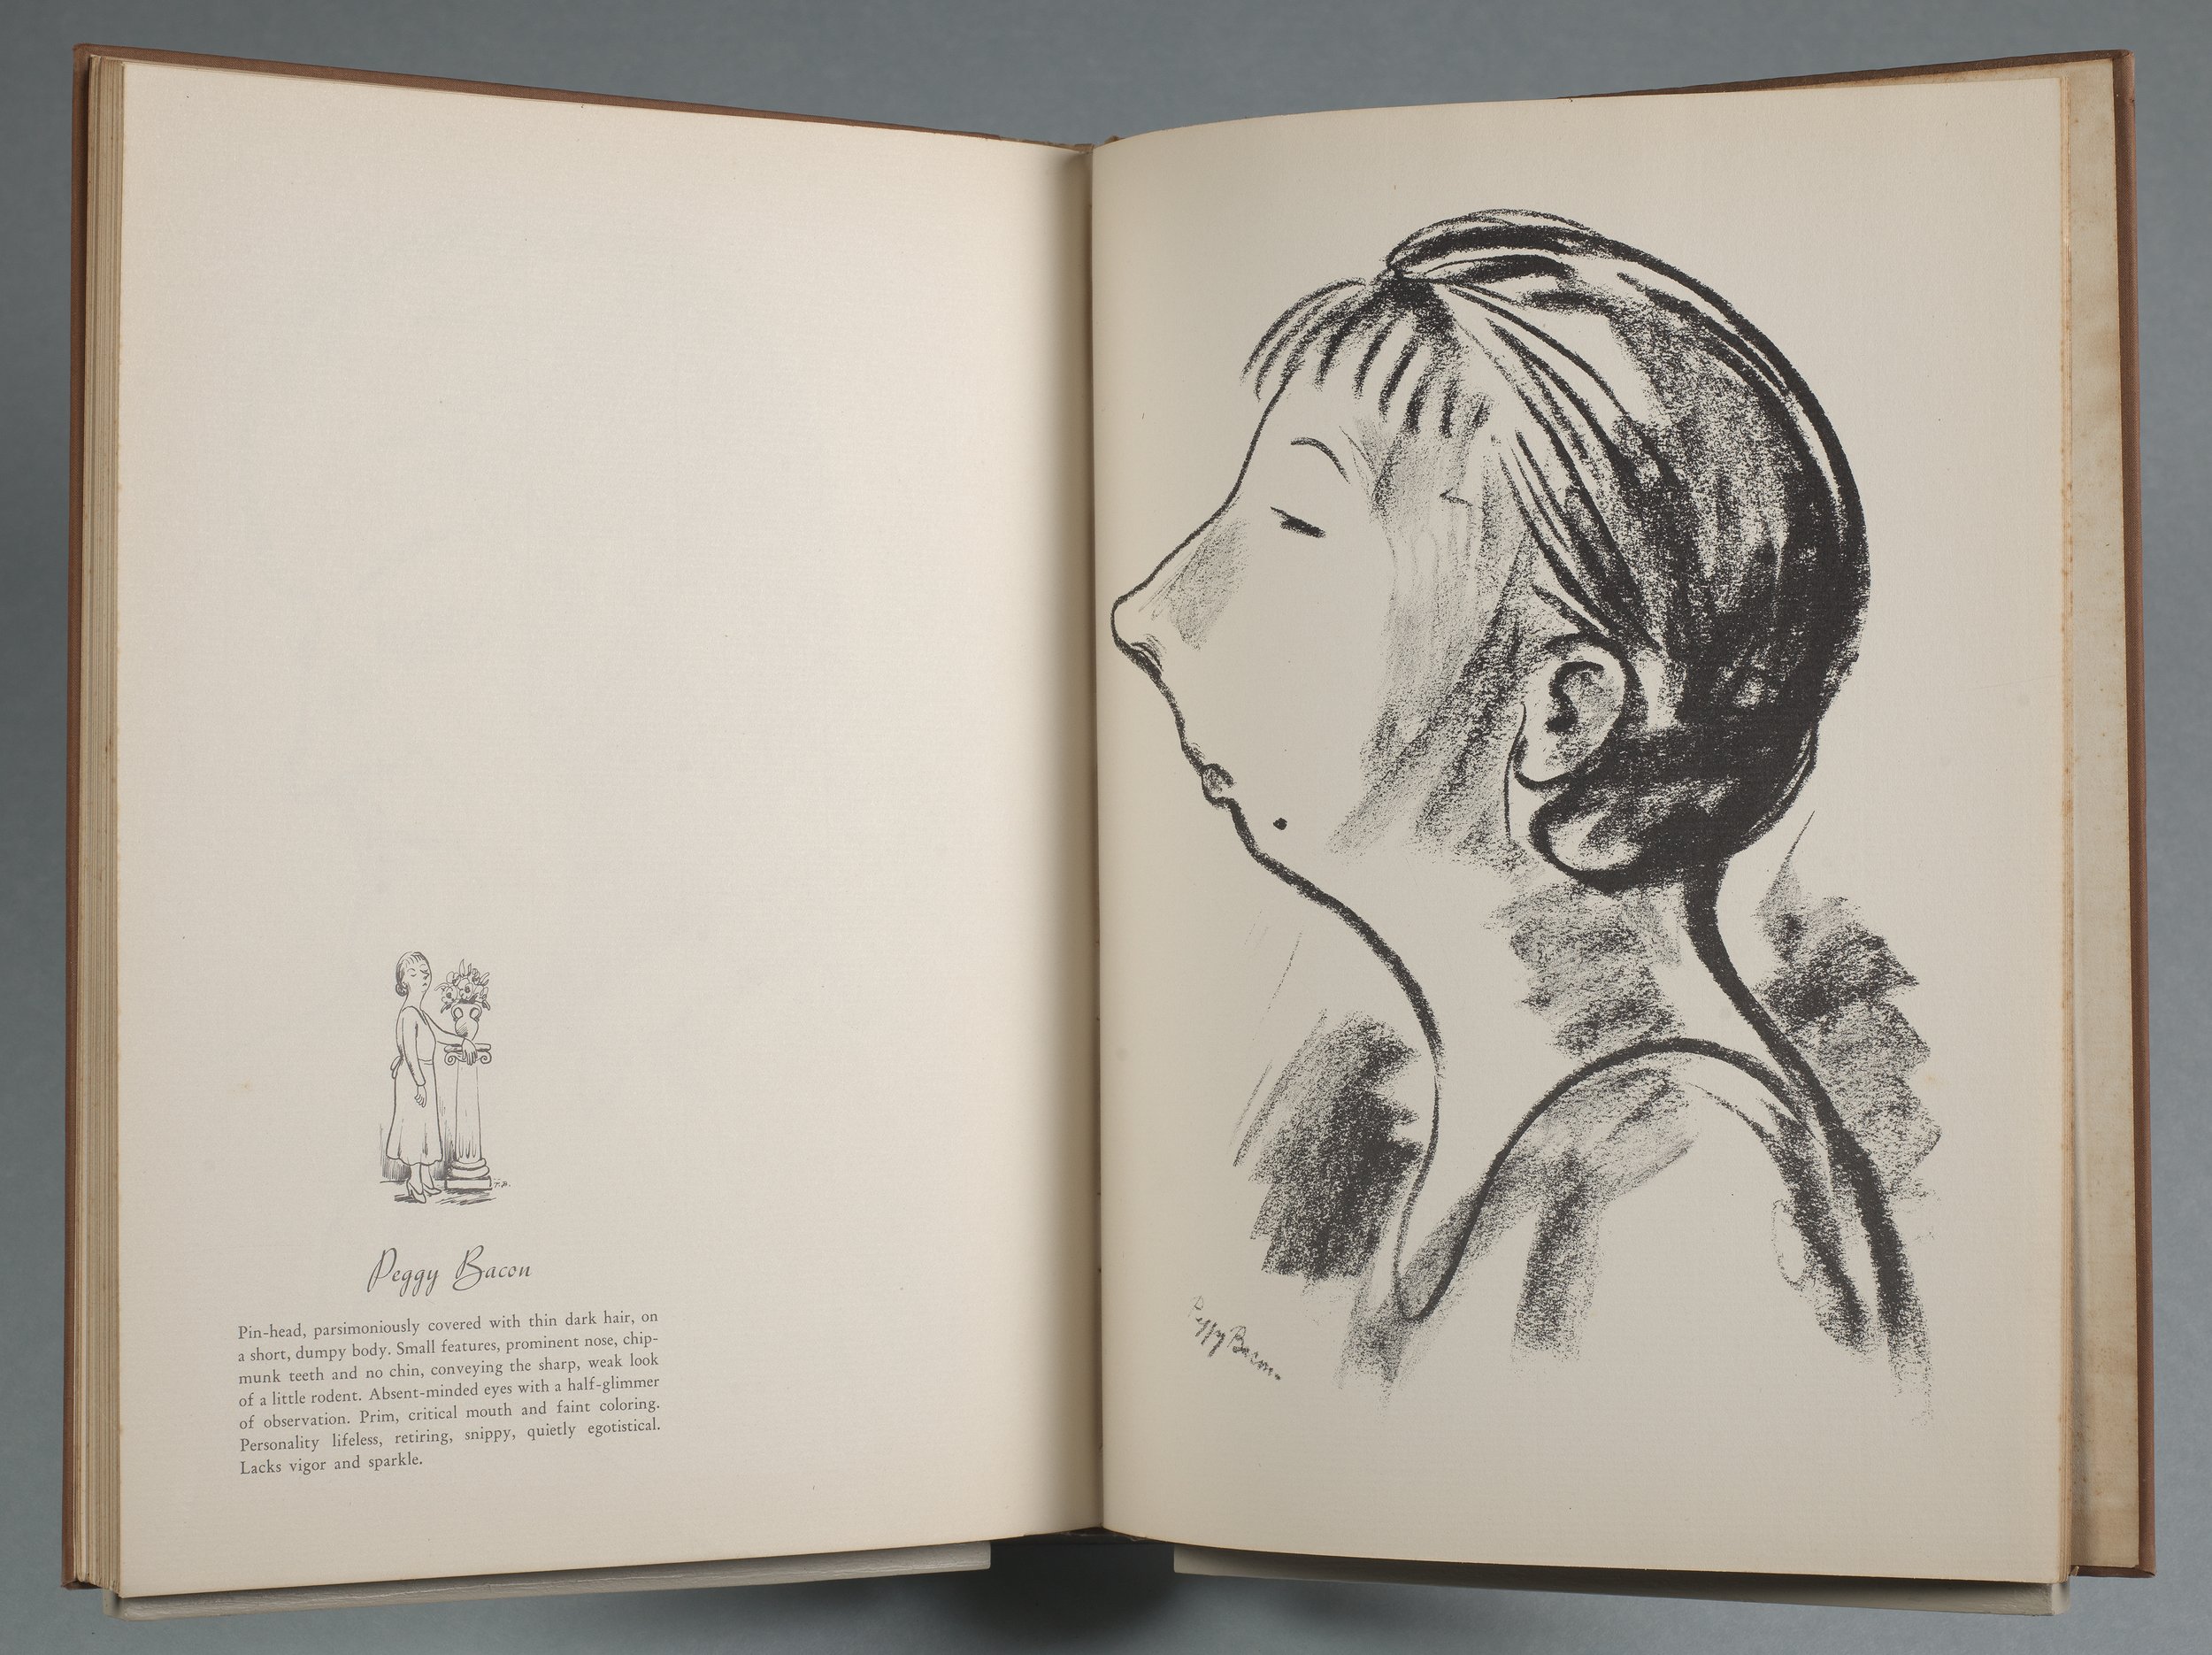  Peggy Bacon (United States, 1895 - 1987),  Peggy Bacon  from  Off with their Heads! , 1934, clothbound hardcover book with 39 offset lithograph illustrations on paper, 12 1/2 x 9 1/2 x 1/2 inches. Museum purchase with support from the Barbara Cash C